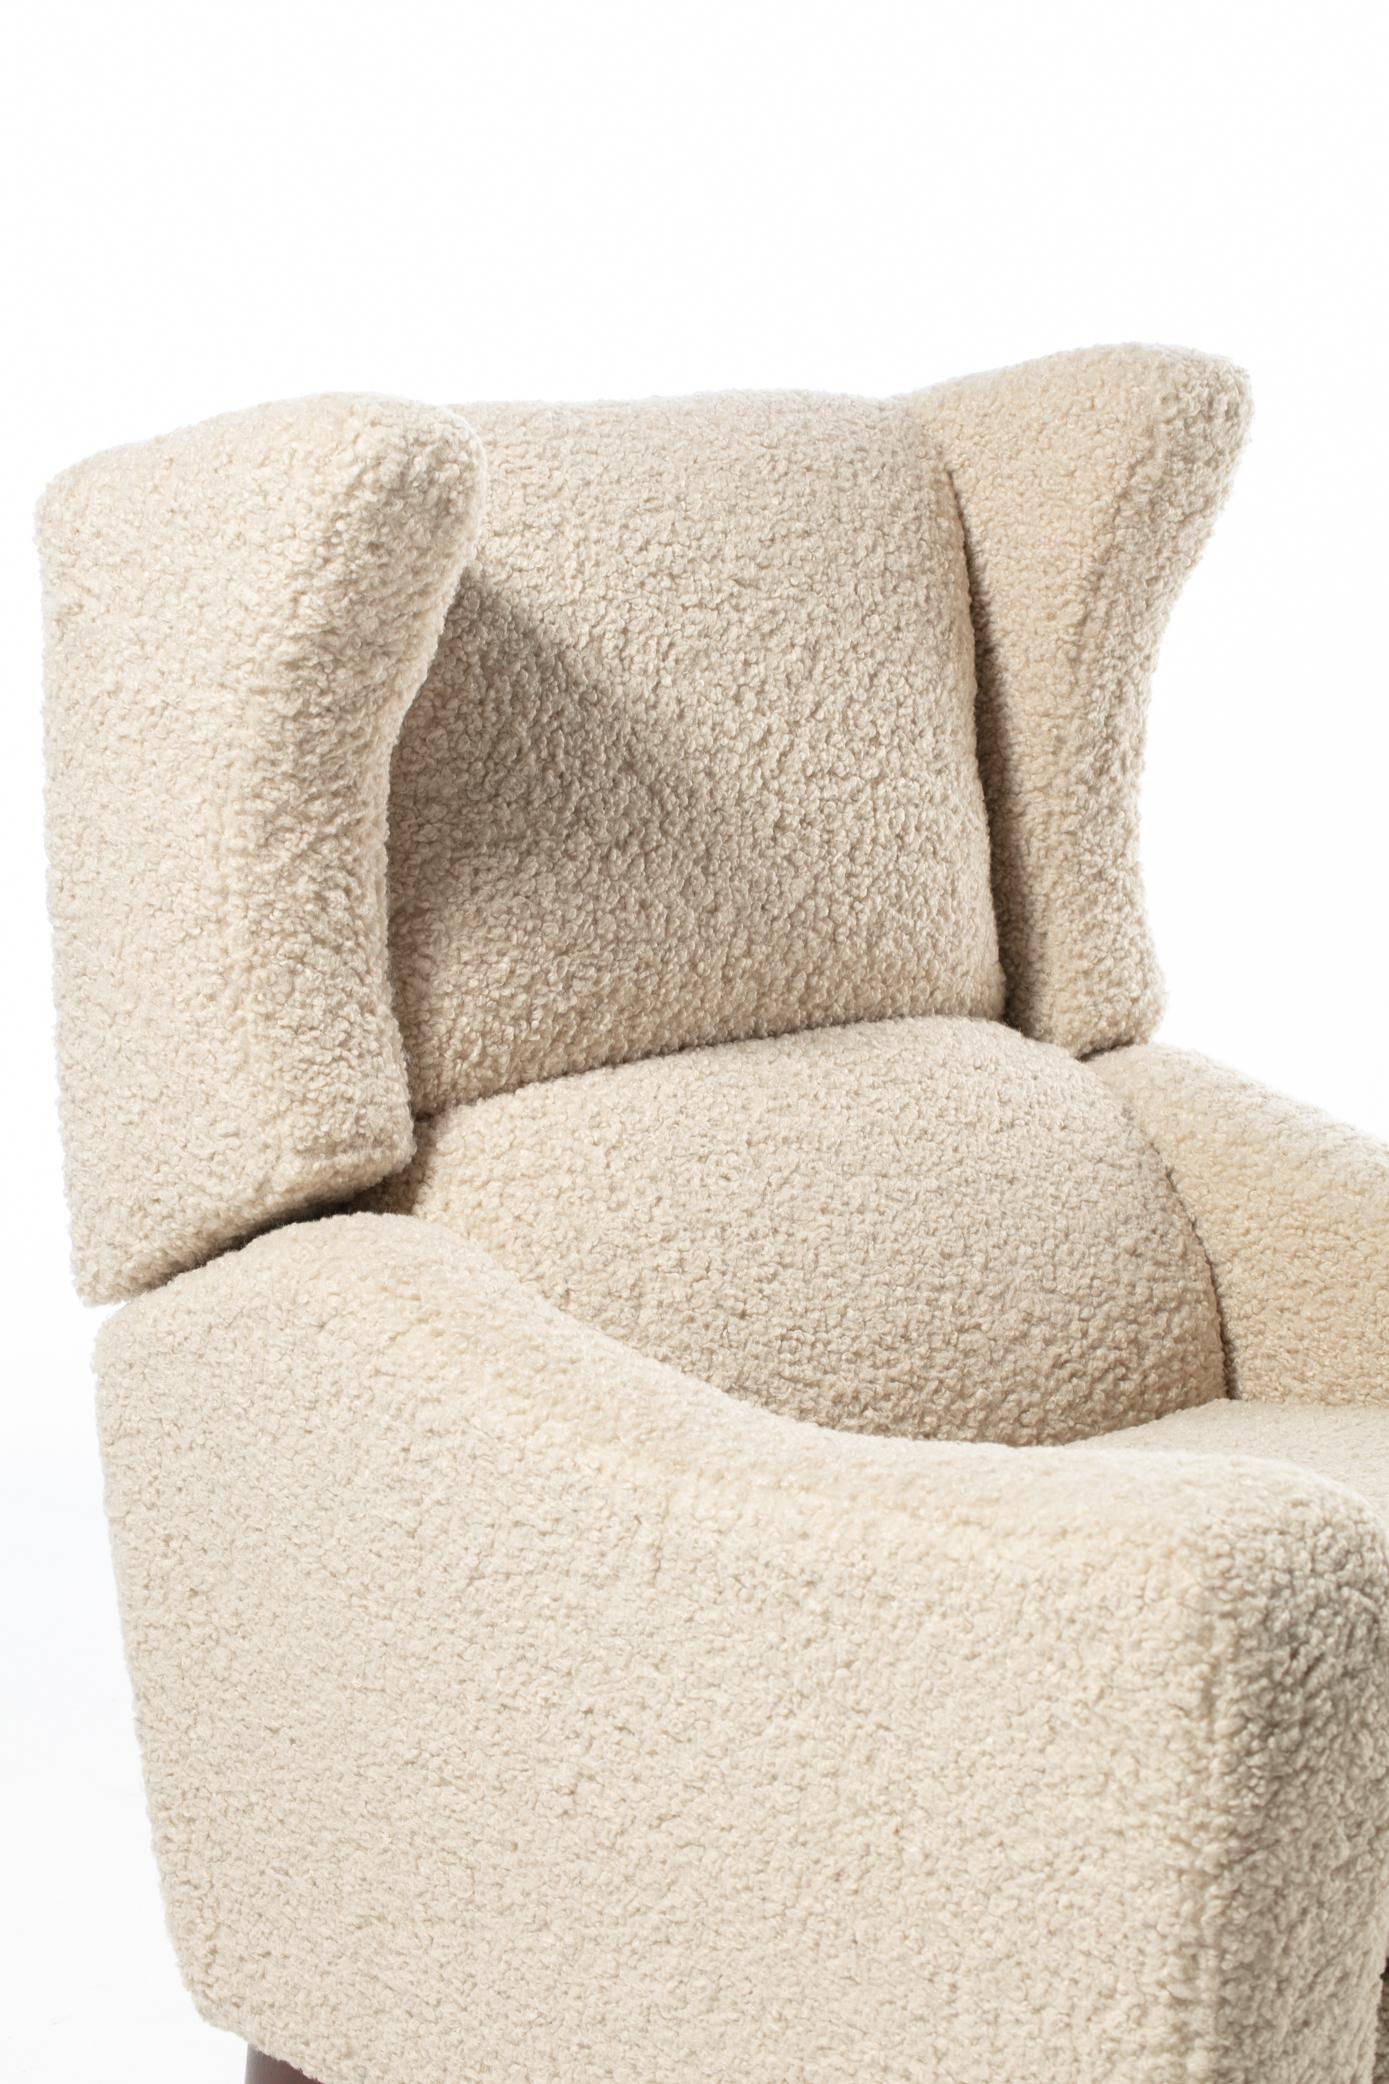 Vladimir Kagan Juno Wingback Recliner Chairs in Soft Ivory White Bouclé  For Sale 6